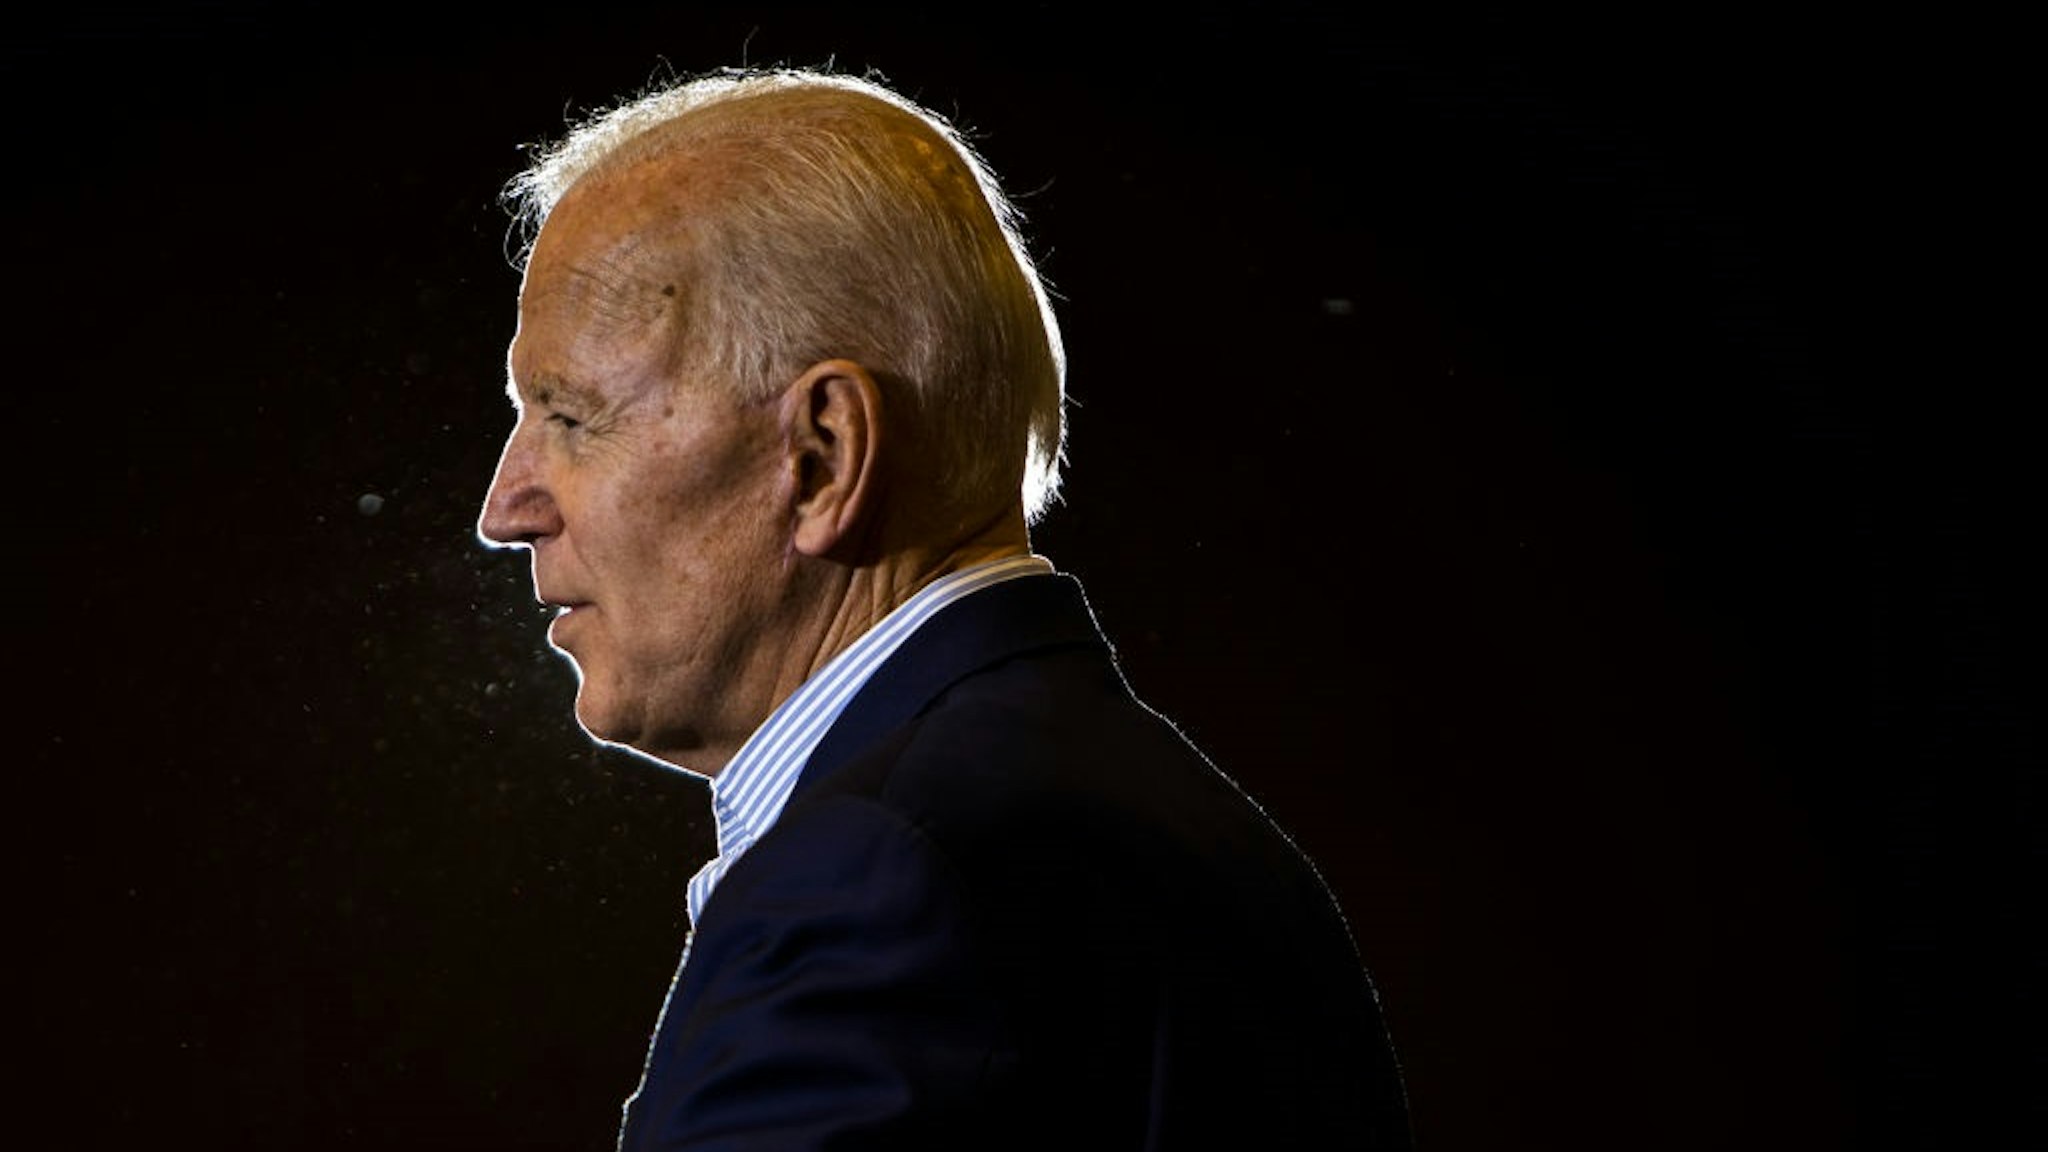 Former U.S. Vice President Joe Biden, 2020 Democratic presidential candidate, speaks during a campaign stop in Henderson, Nevada, U.S., on Tuesday, May 7, 2019.